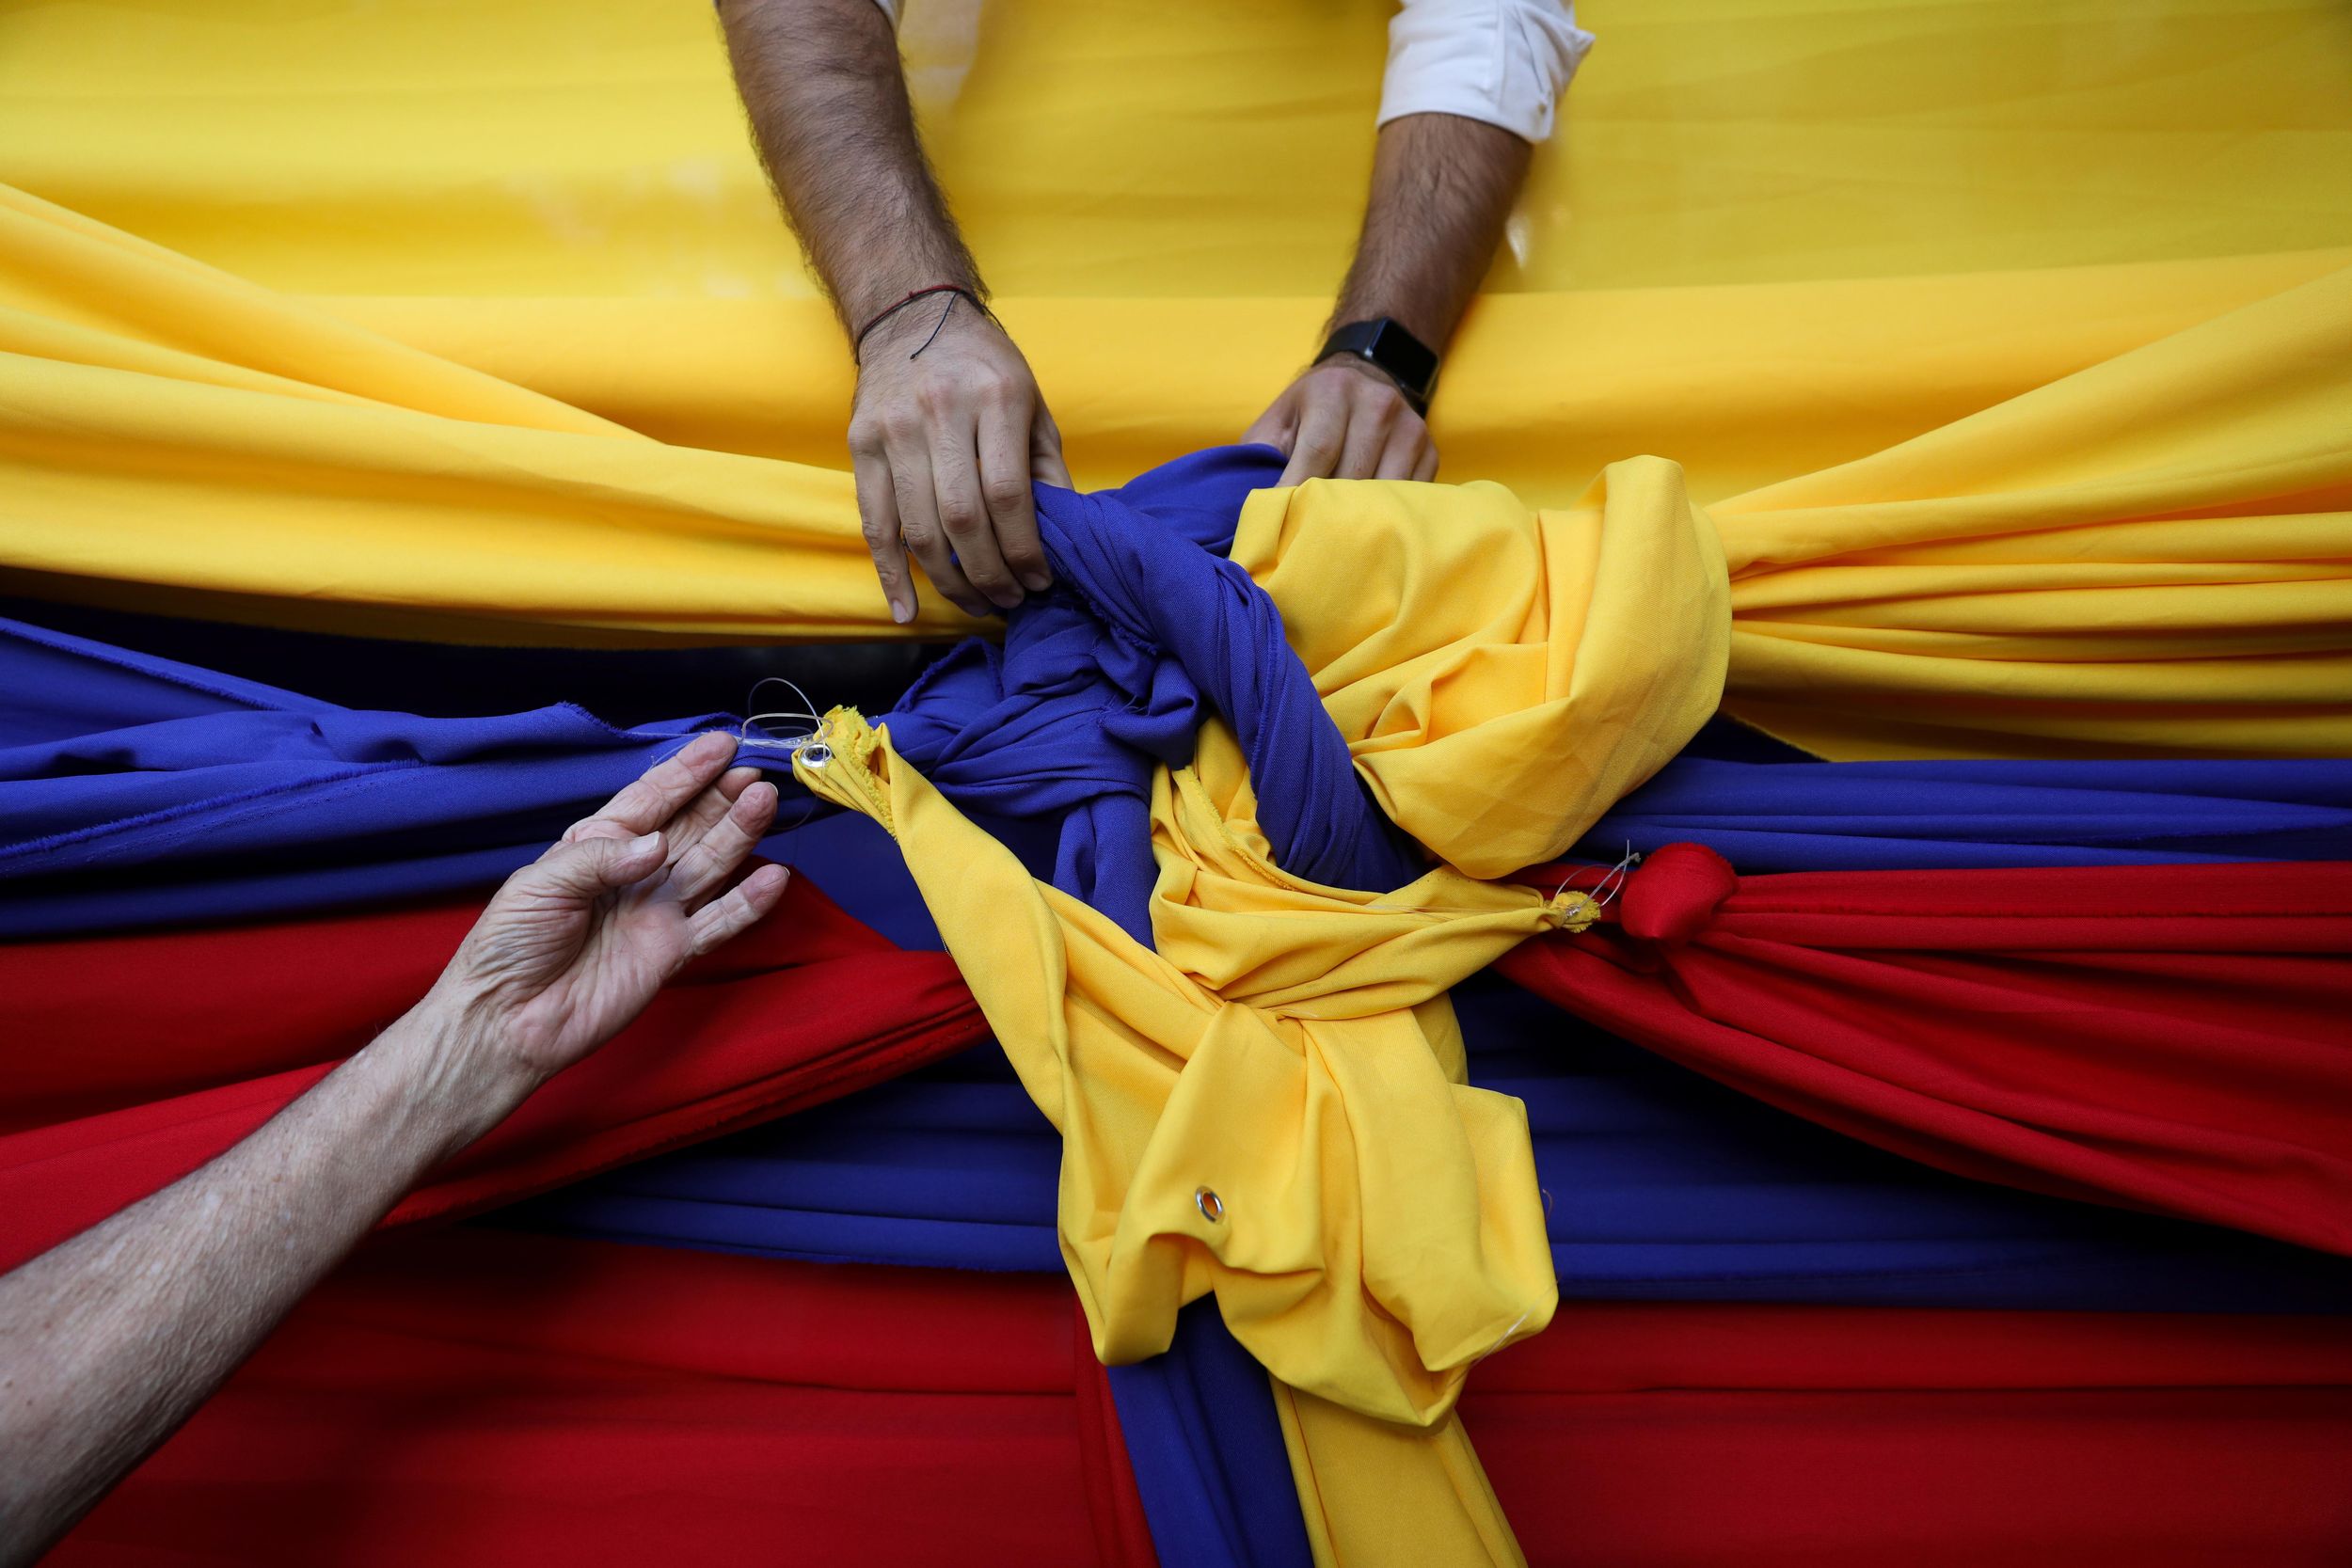 People untie cloth tarps with colors of the Venezuelan flag after a citizen assembly with Juan Guaidó, speaker of the National Assembly, in Caracas. Reuters